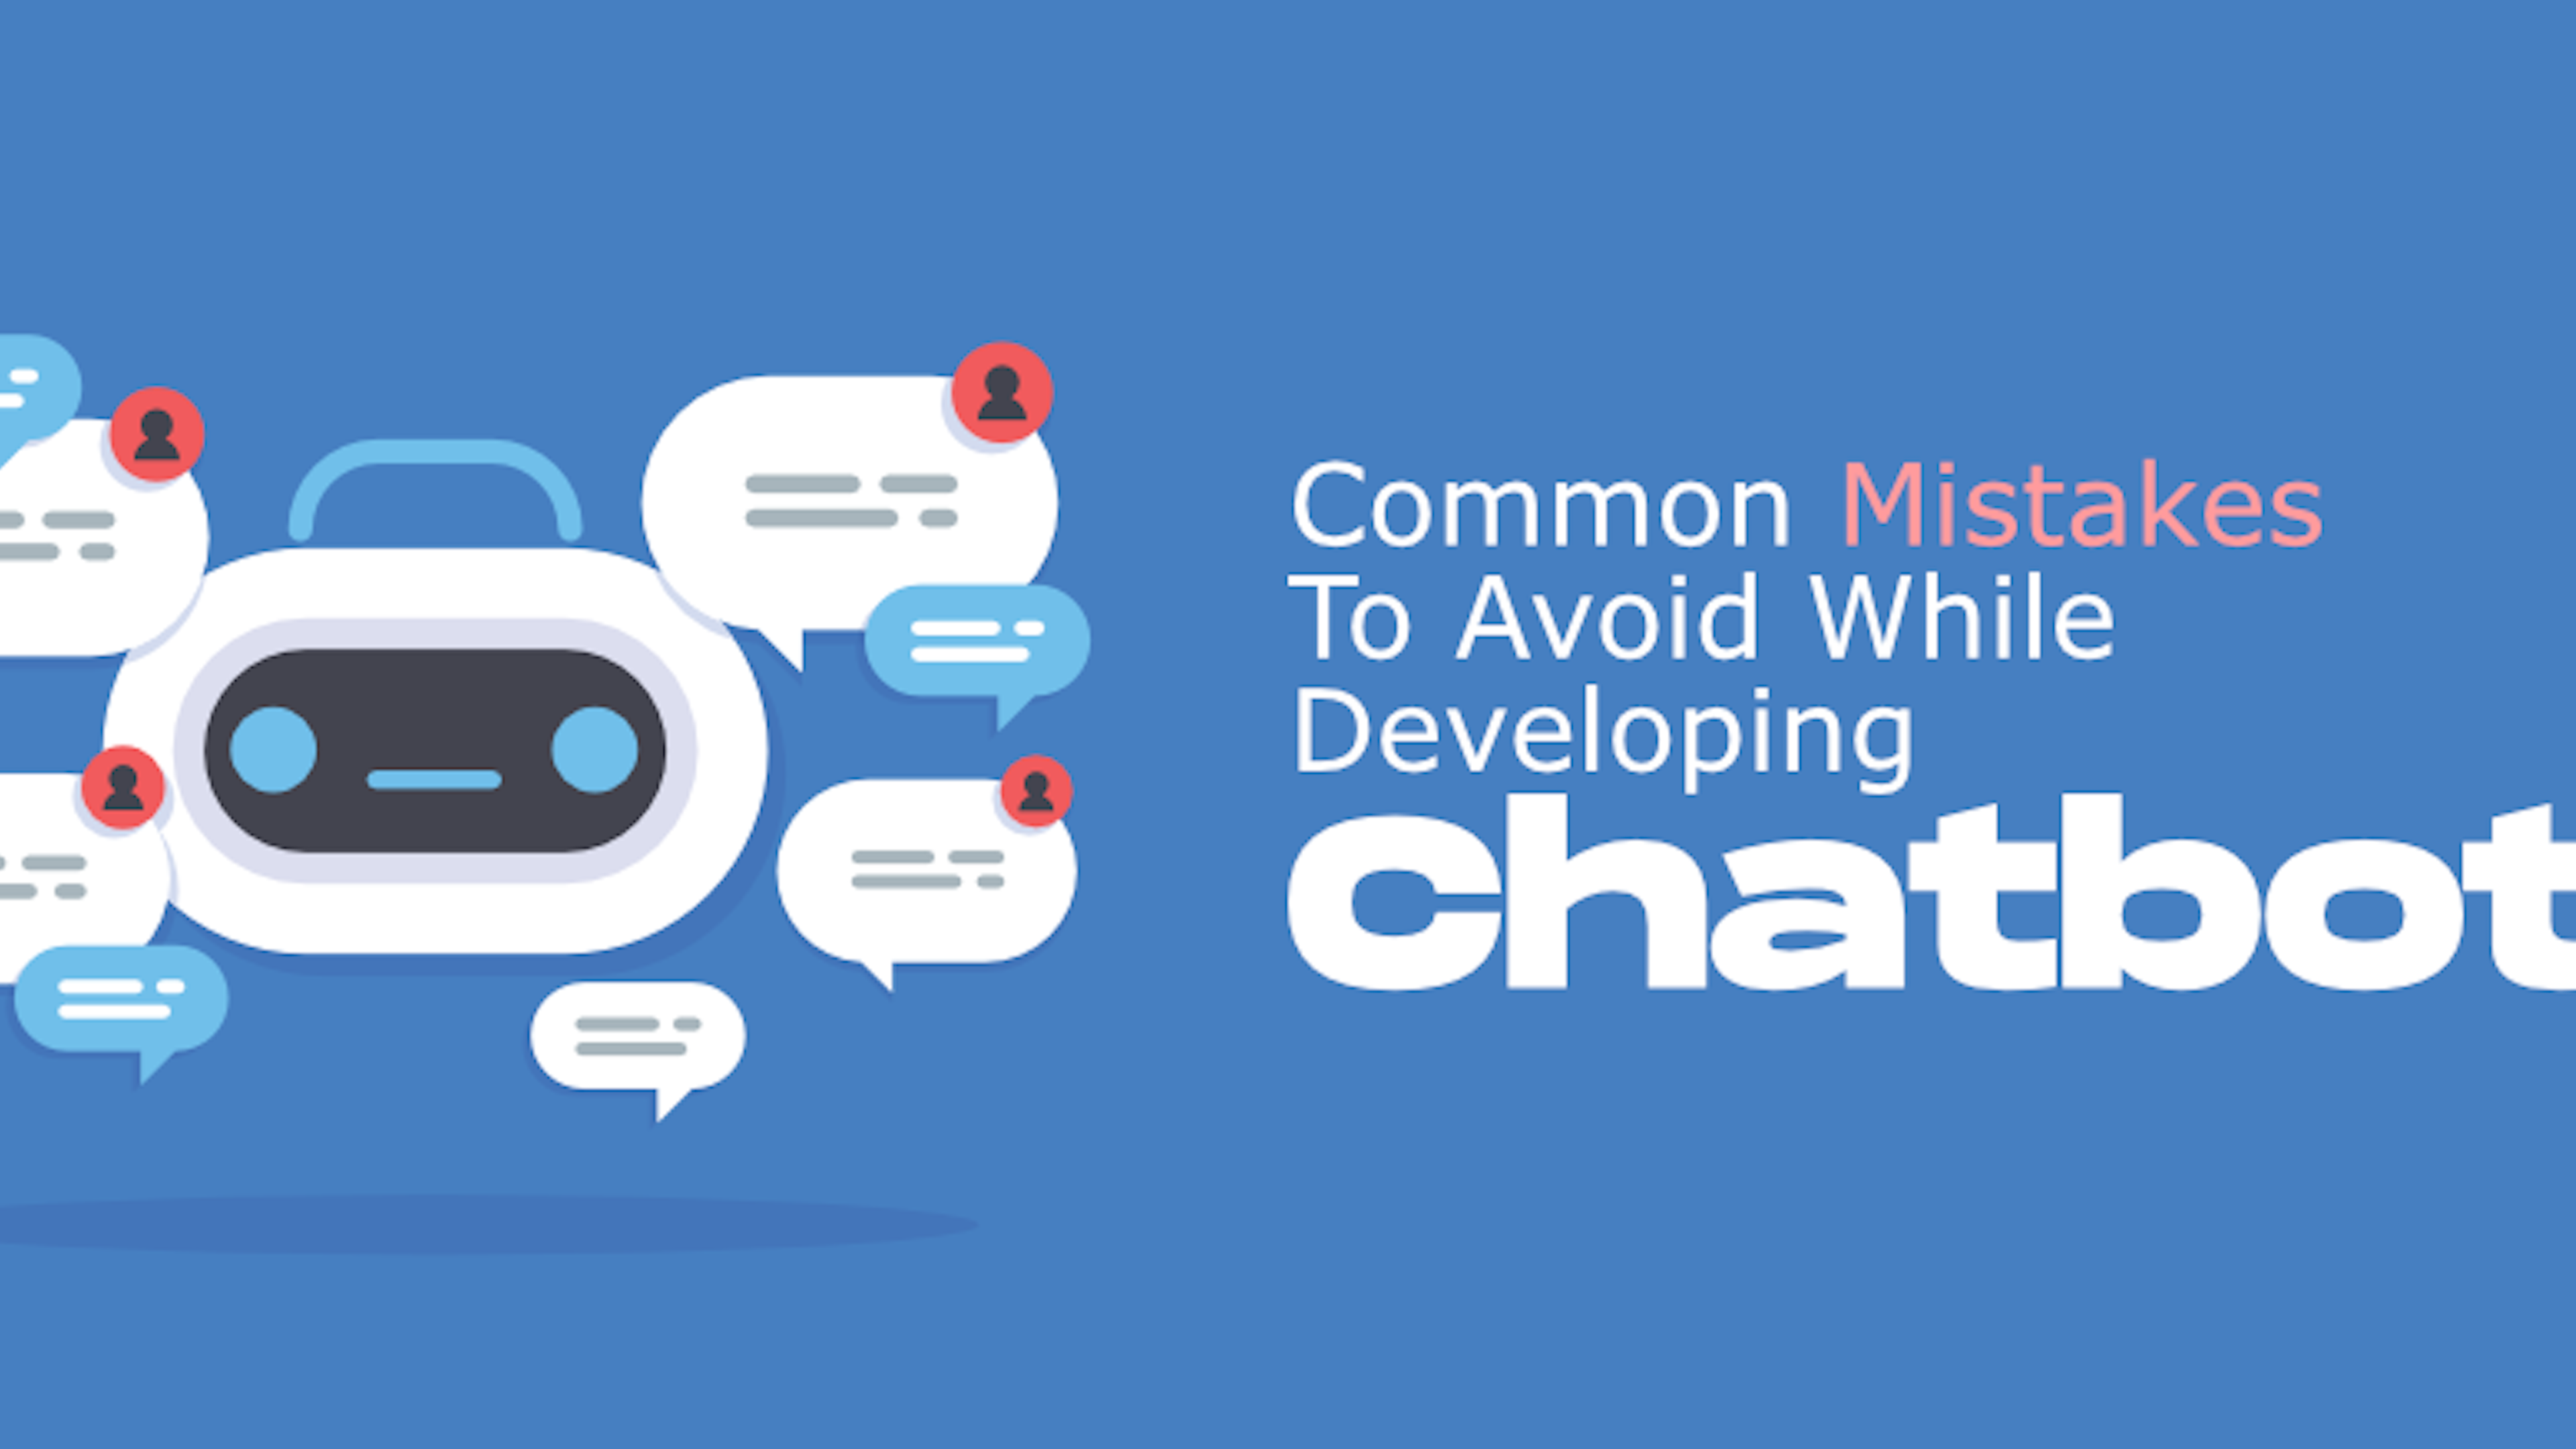 Common Mistakes To Avoid While Developing Chatbots